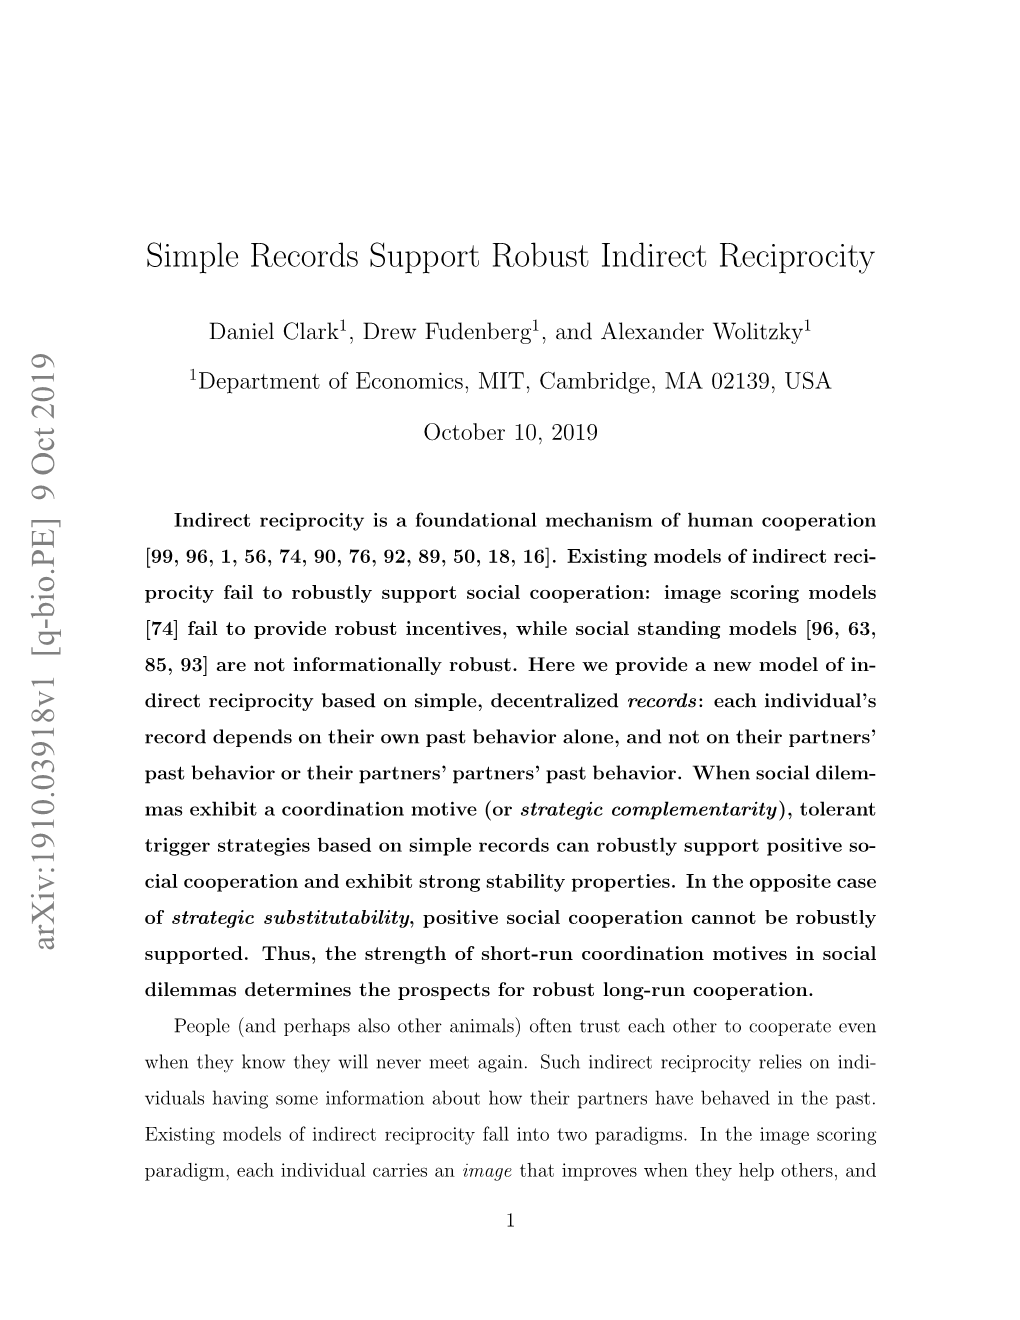 Simple Records Support Robust Indirect Reciprocity